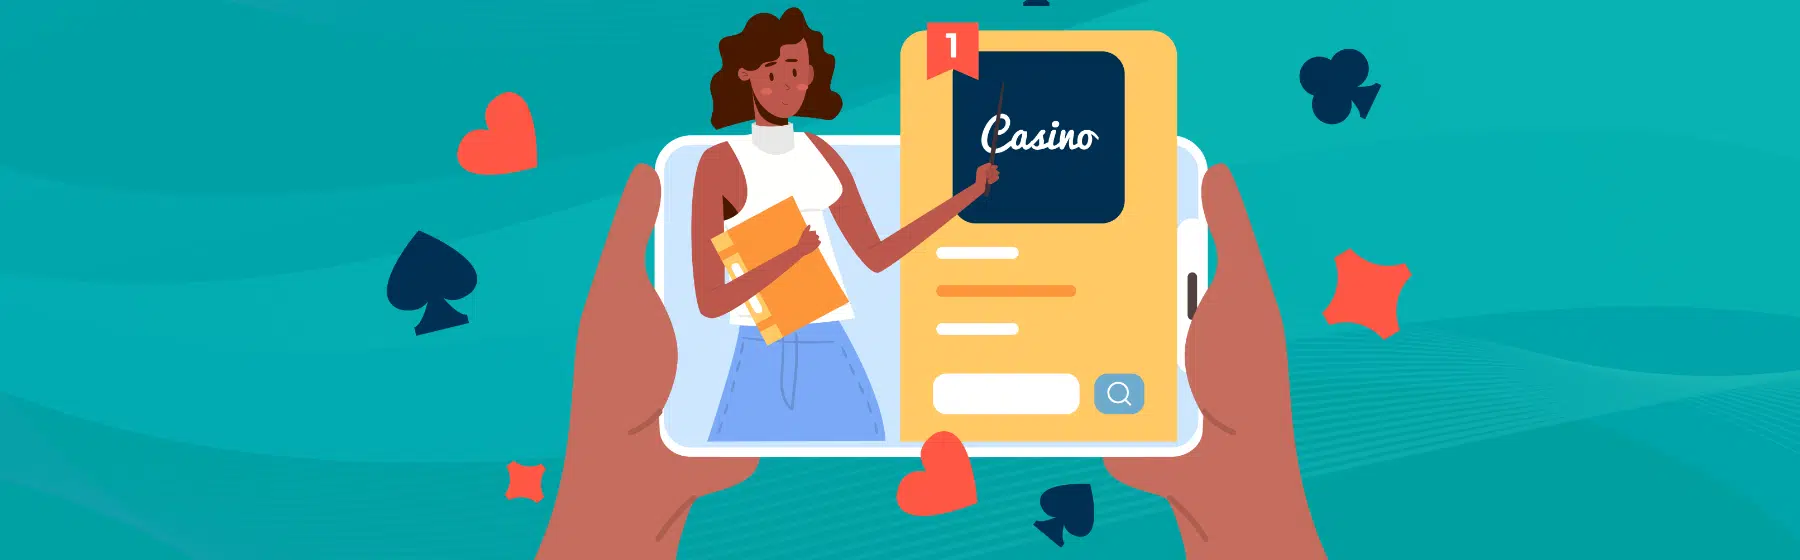 step by step guide how to start playing at new online casino